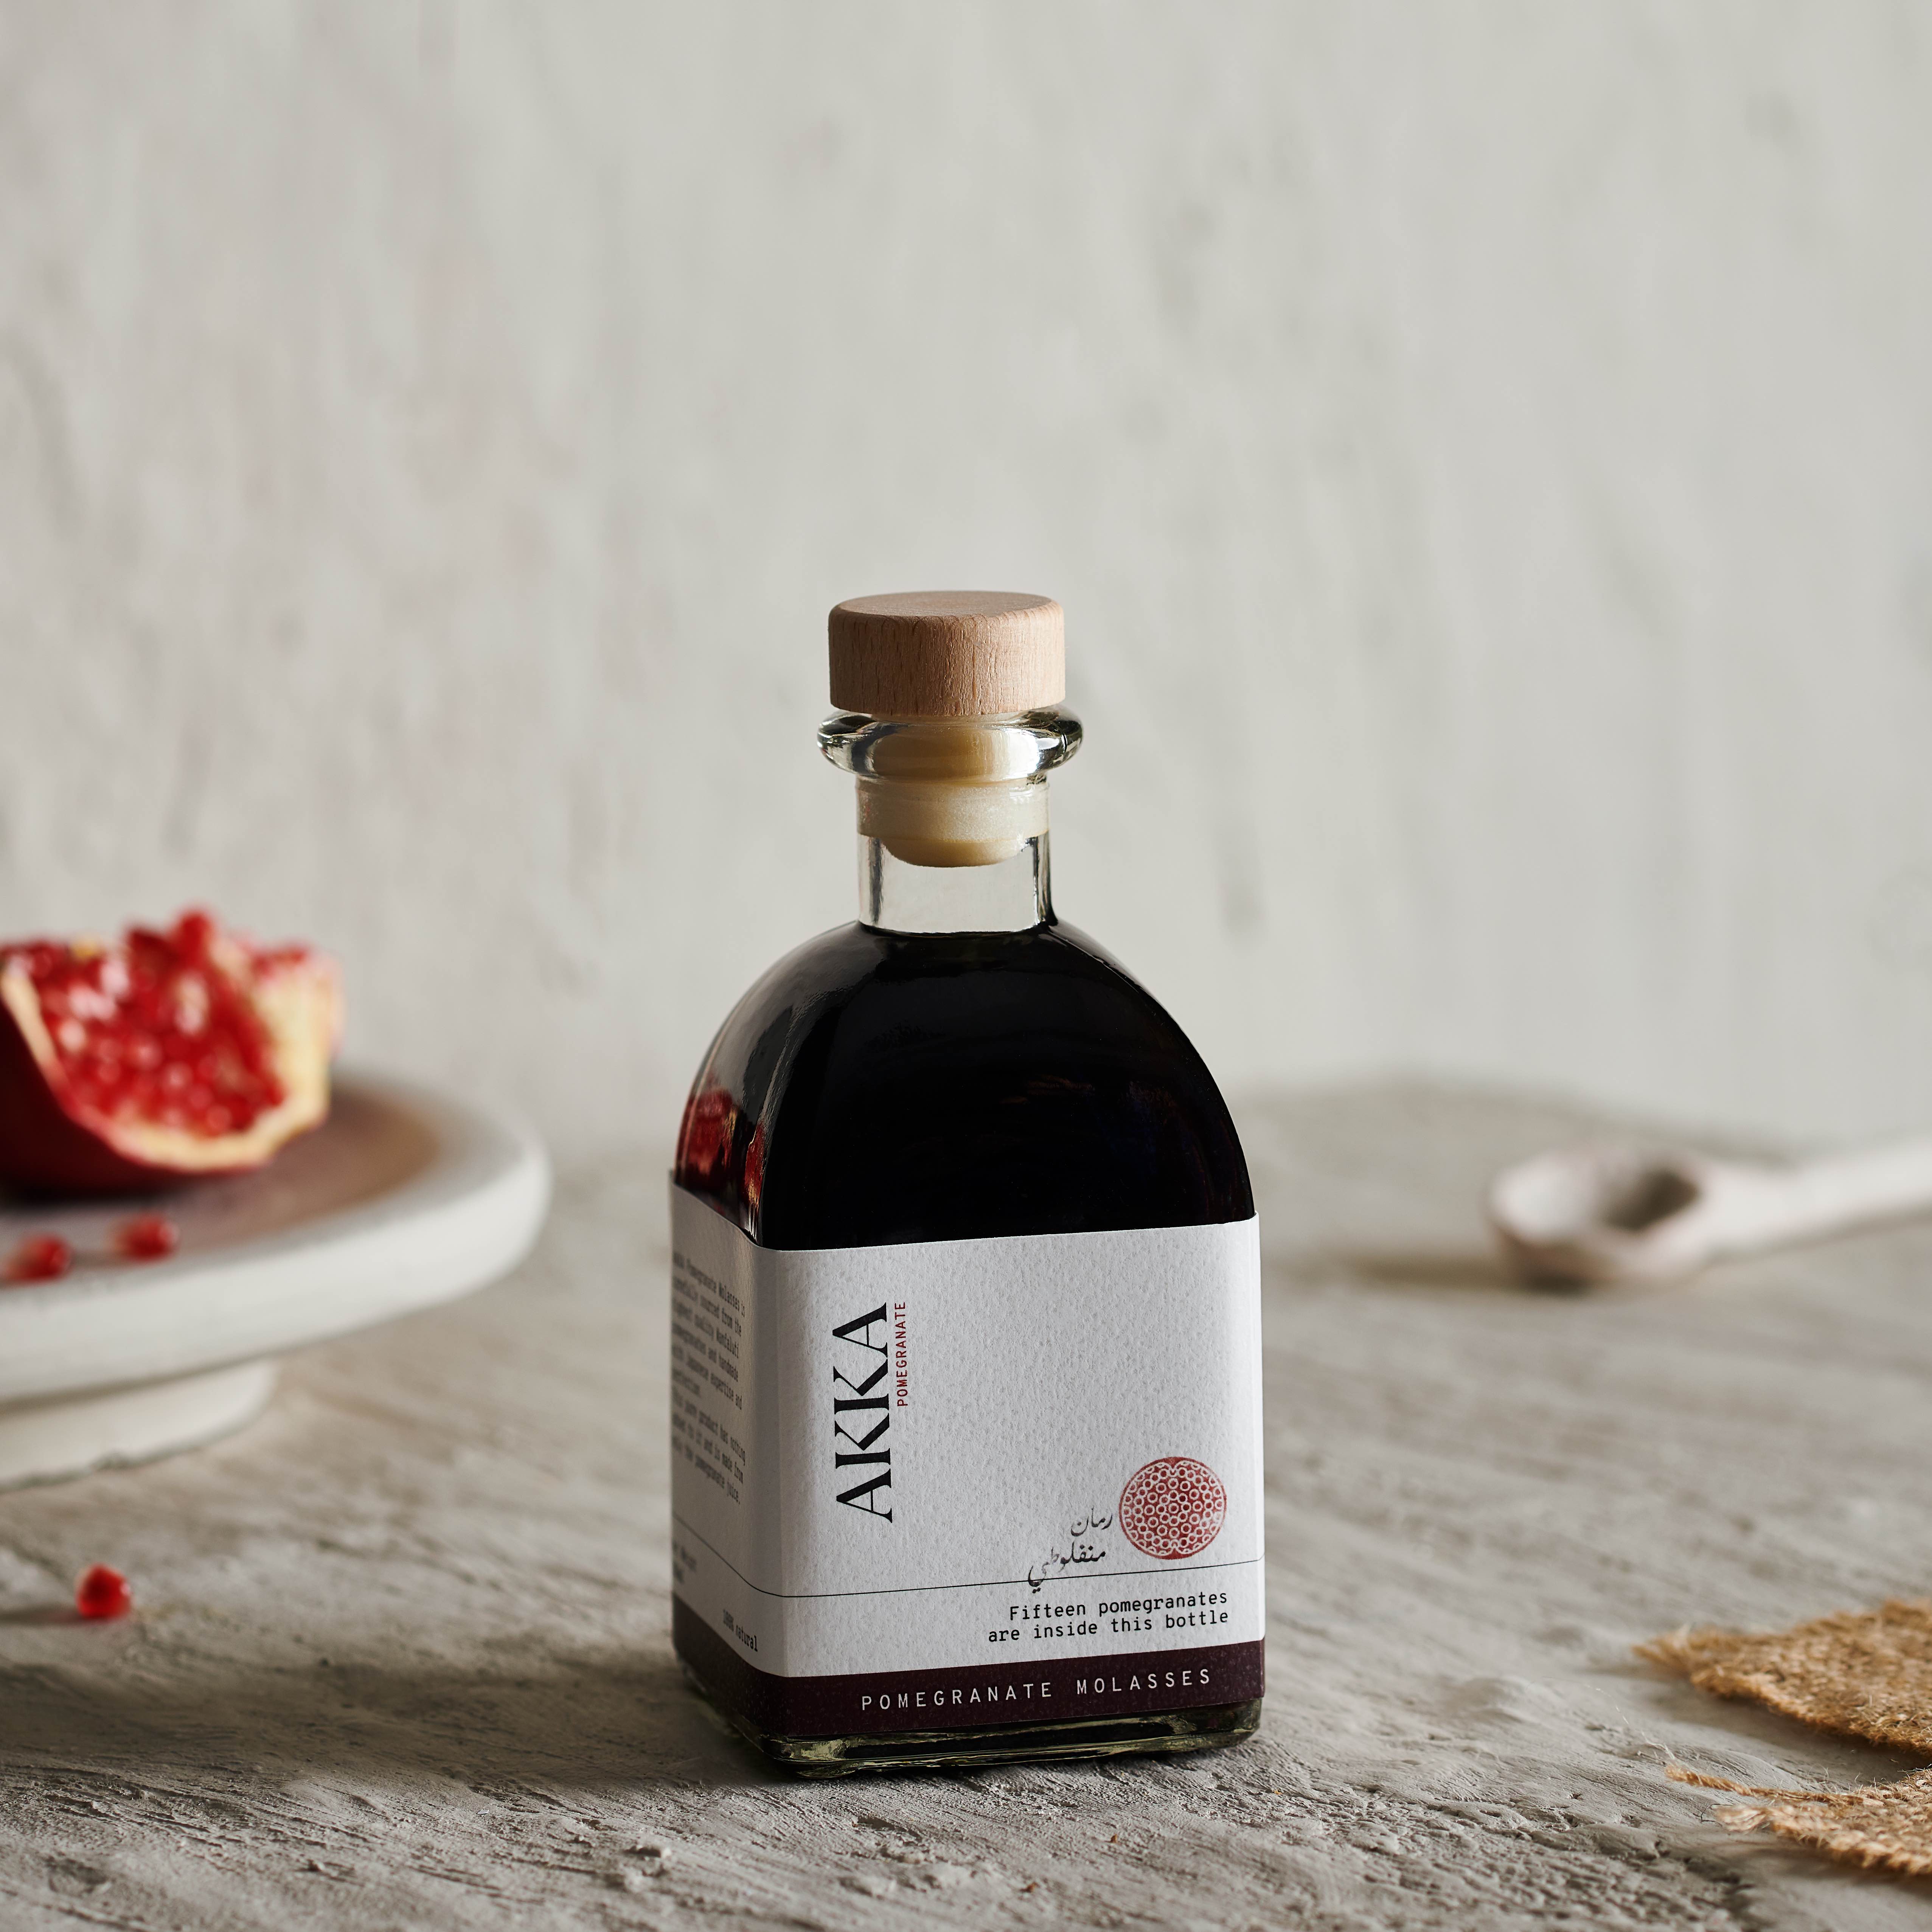 Brand Identity Development and Packaging for Akka by Studio Real